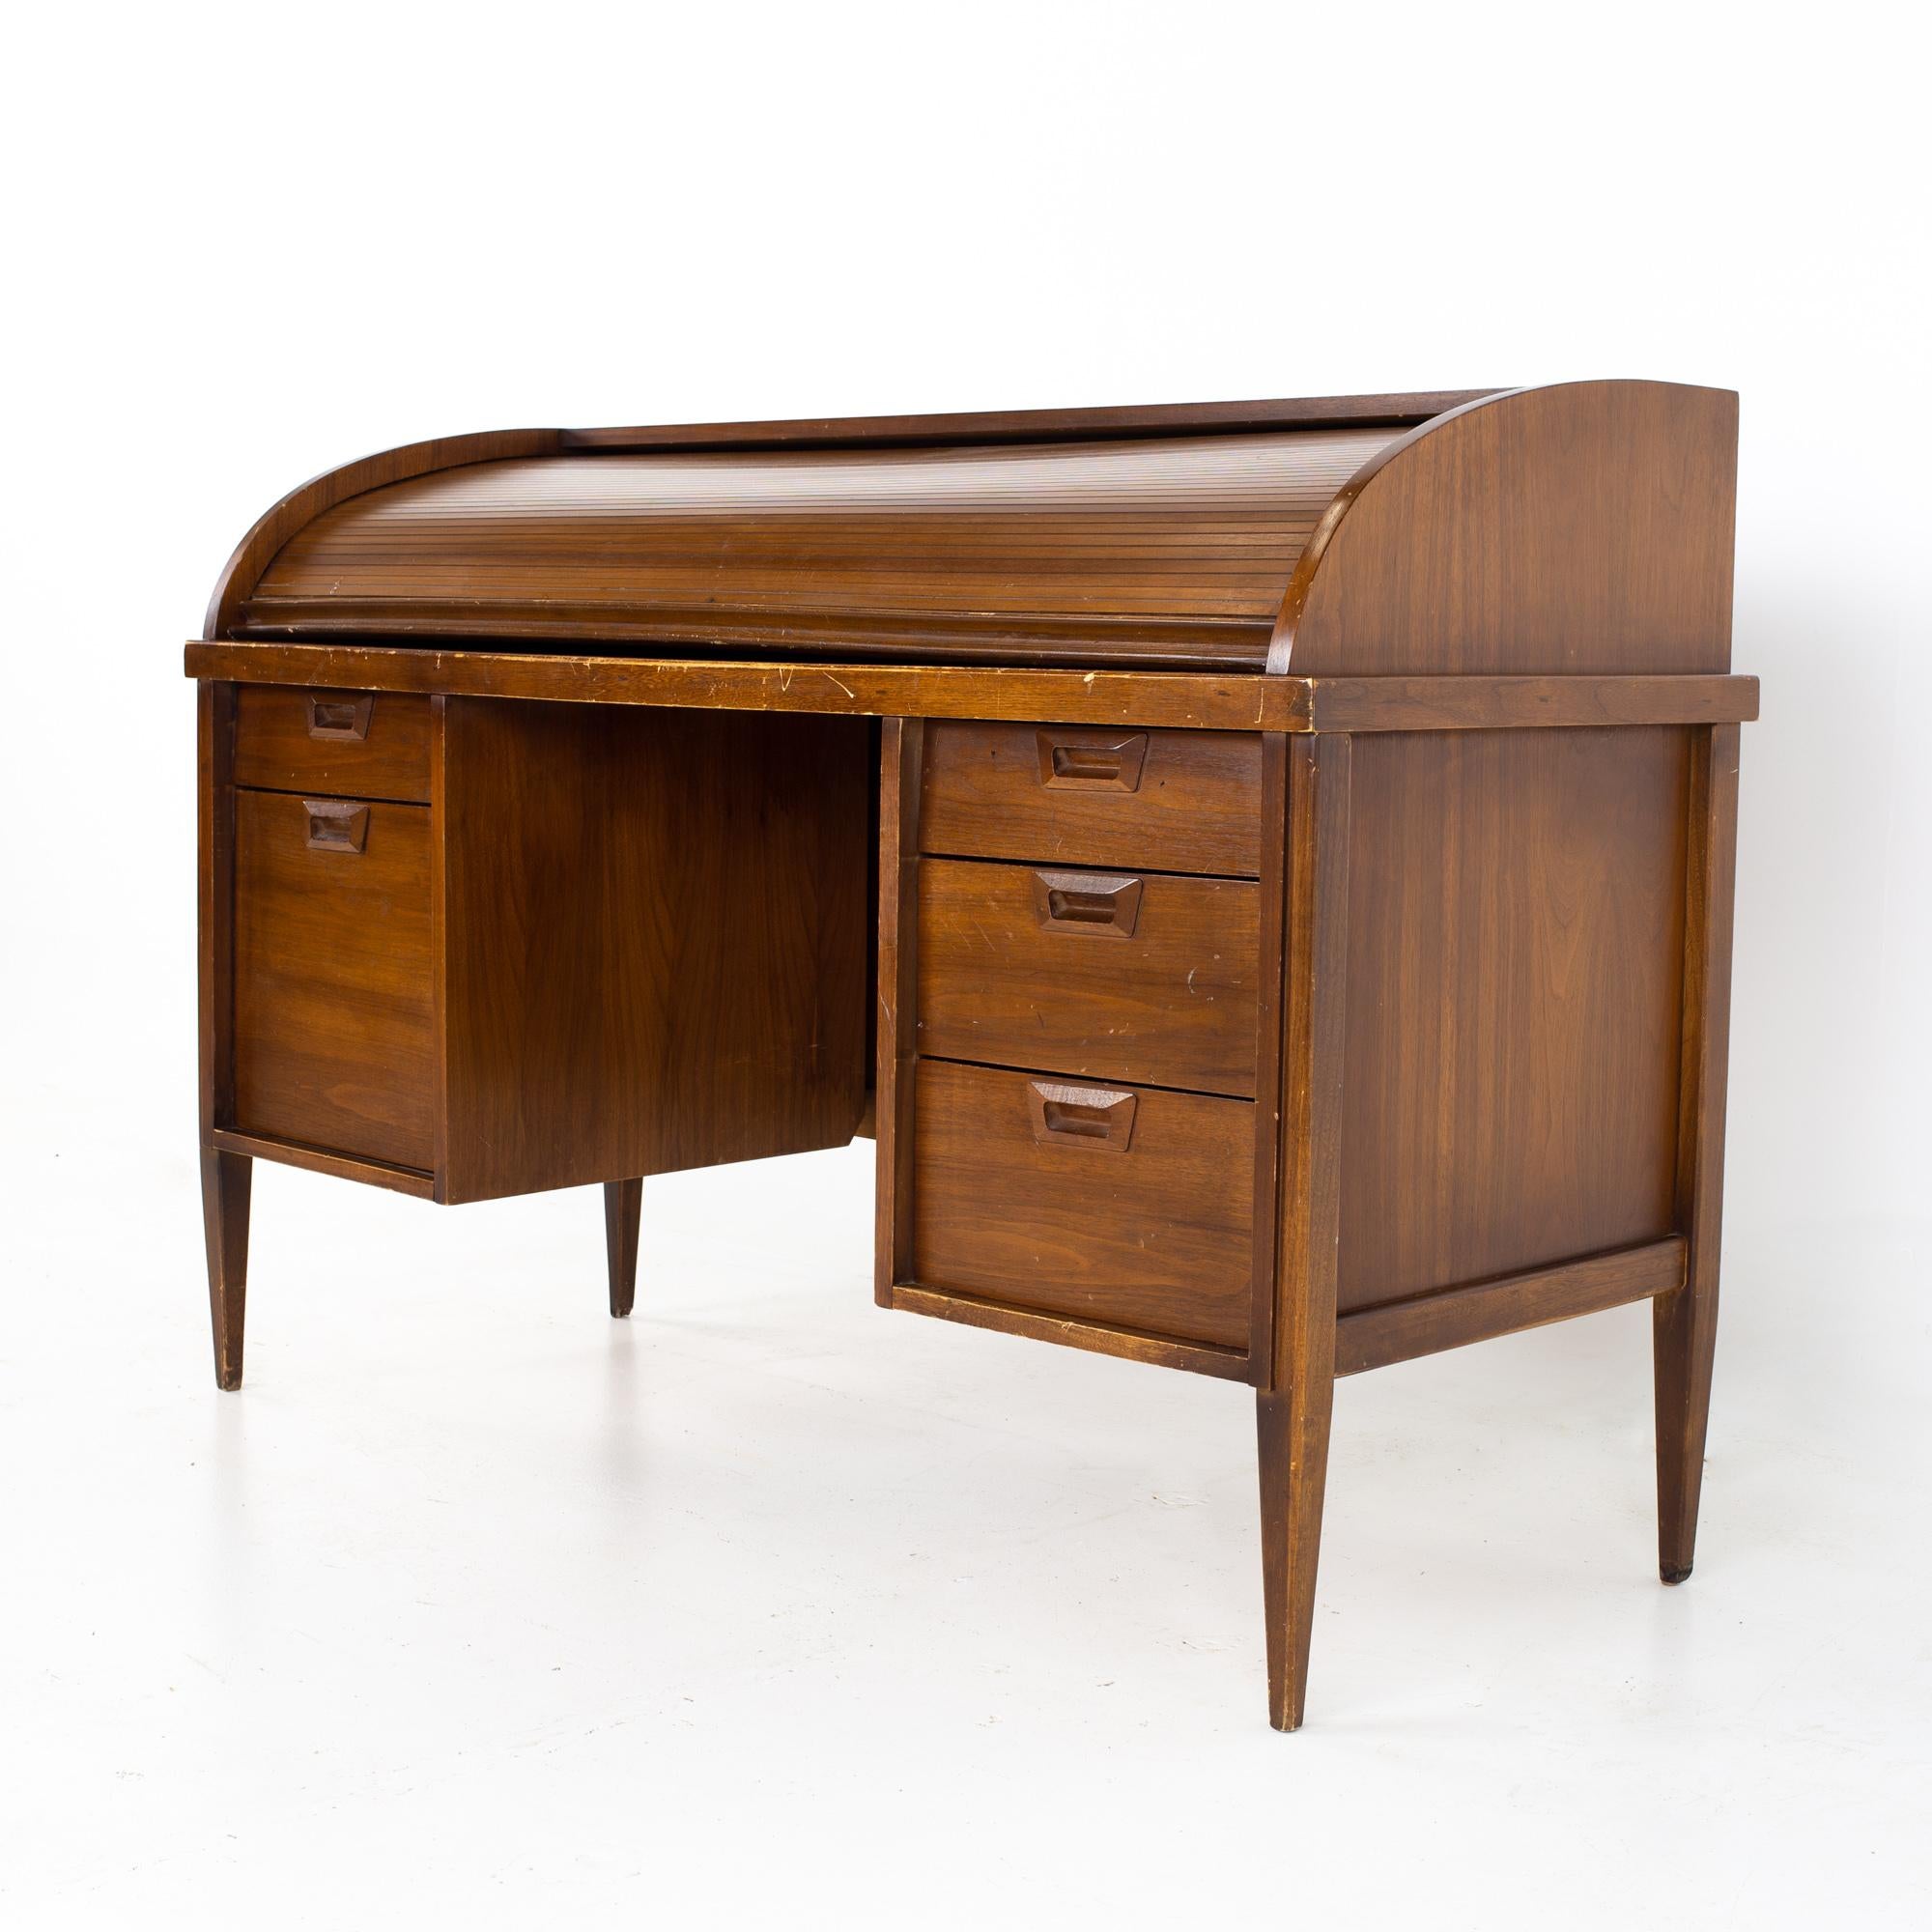 Mid century walnut roll top desk
Desk measures: 55.25 wide x 22.75 deep x 38 inches high

All pieces of furniture can be had in what we call restored vintage condition. That means the piece is restored upon purchase so it’s free of watermarks,